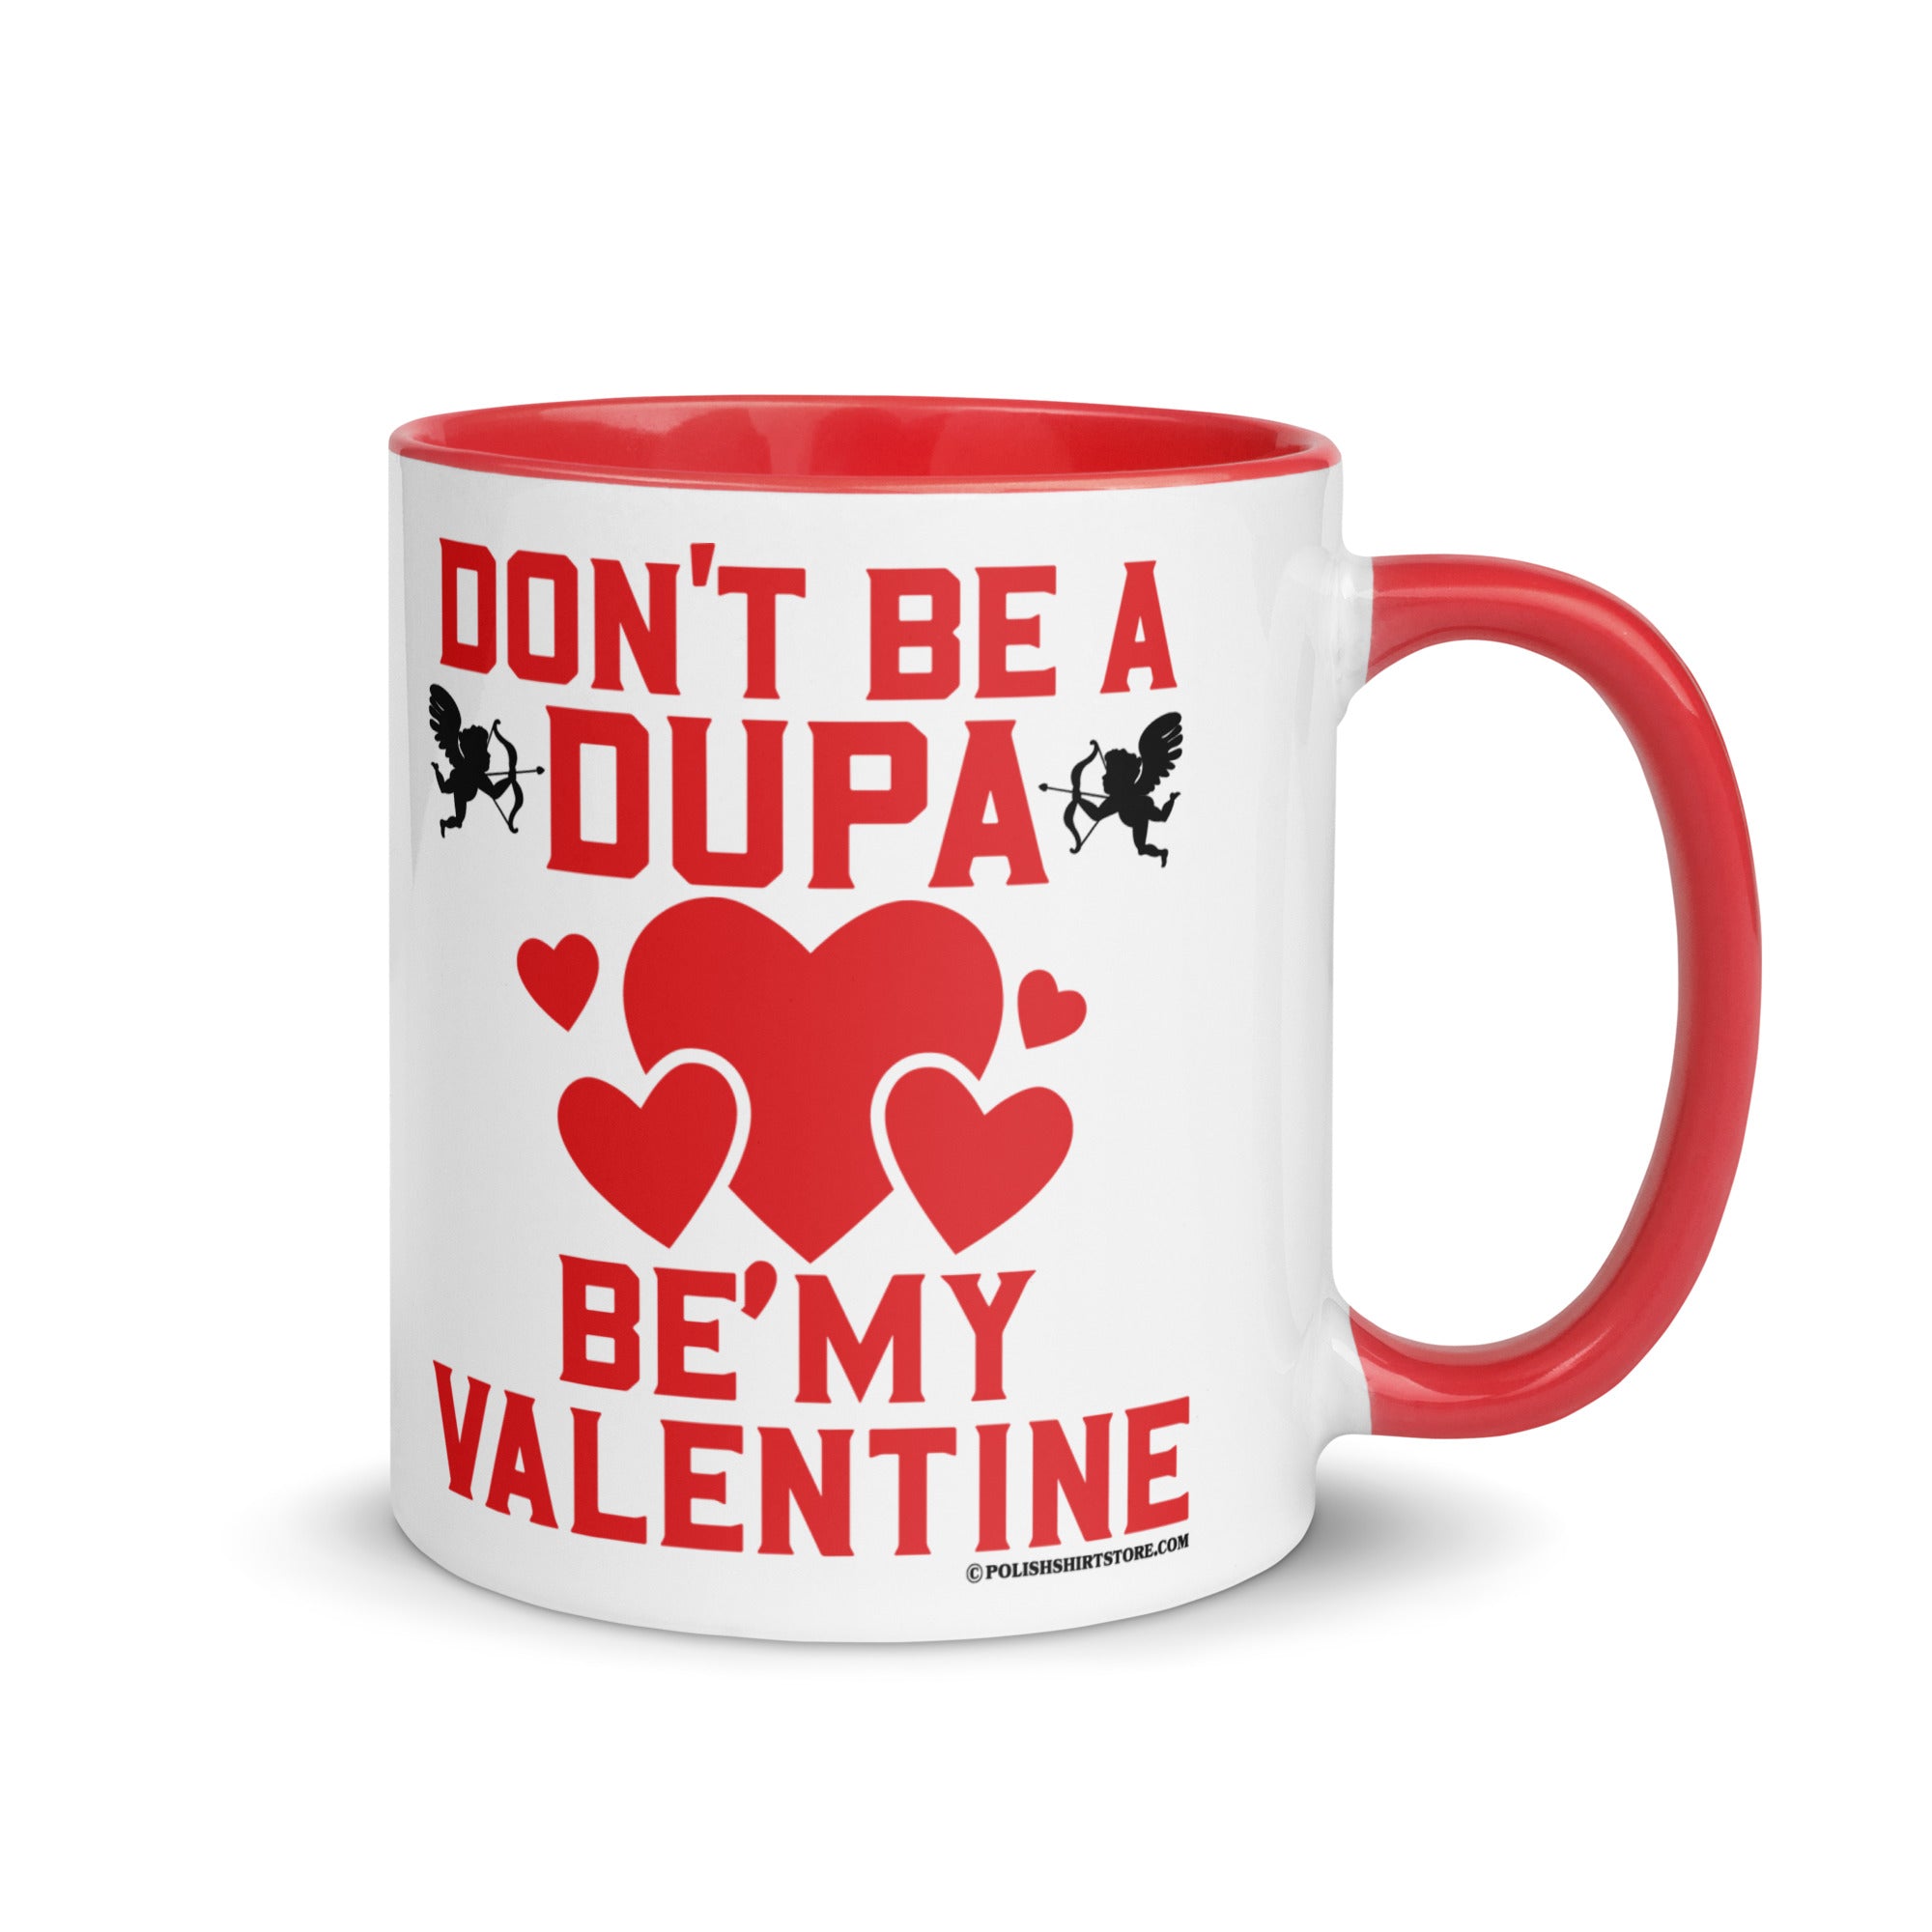 Don't Be A Dupa Be My Valentine Coffee Mug with Color Inside  Polish Shirt Store Red 11 oz 